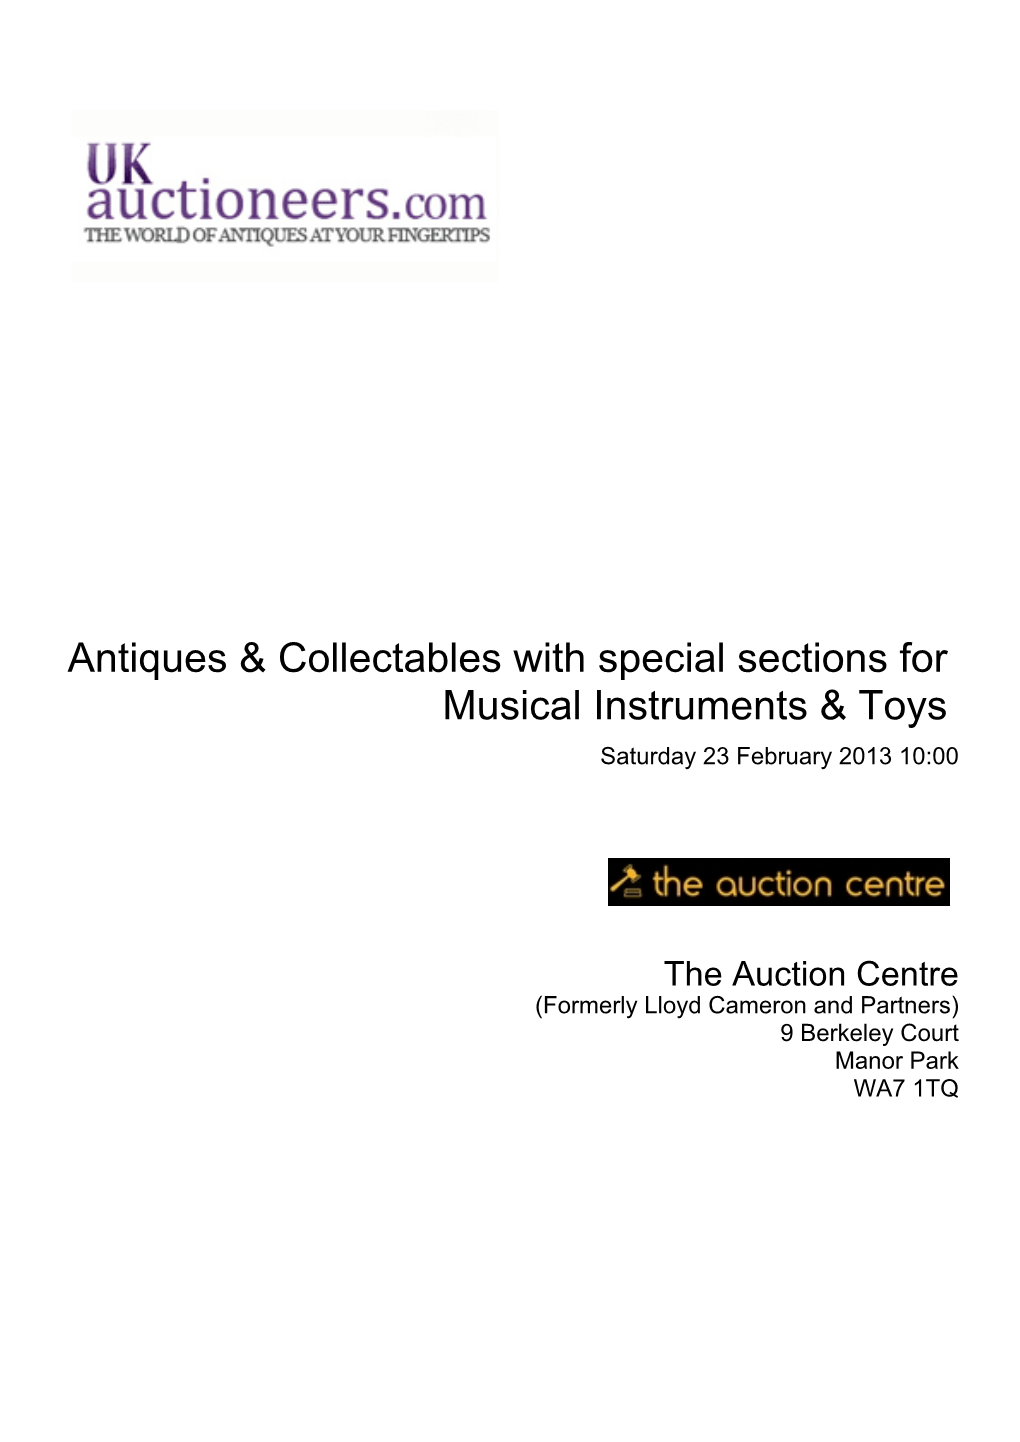 Antiques & Collectables with Special Sections for Musical Instruments